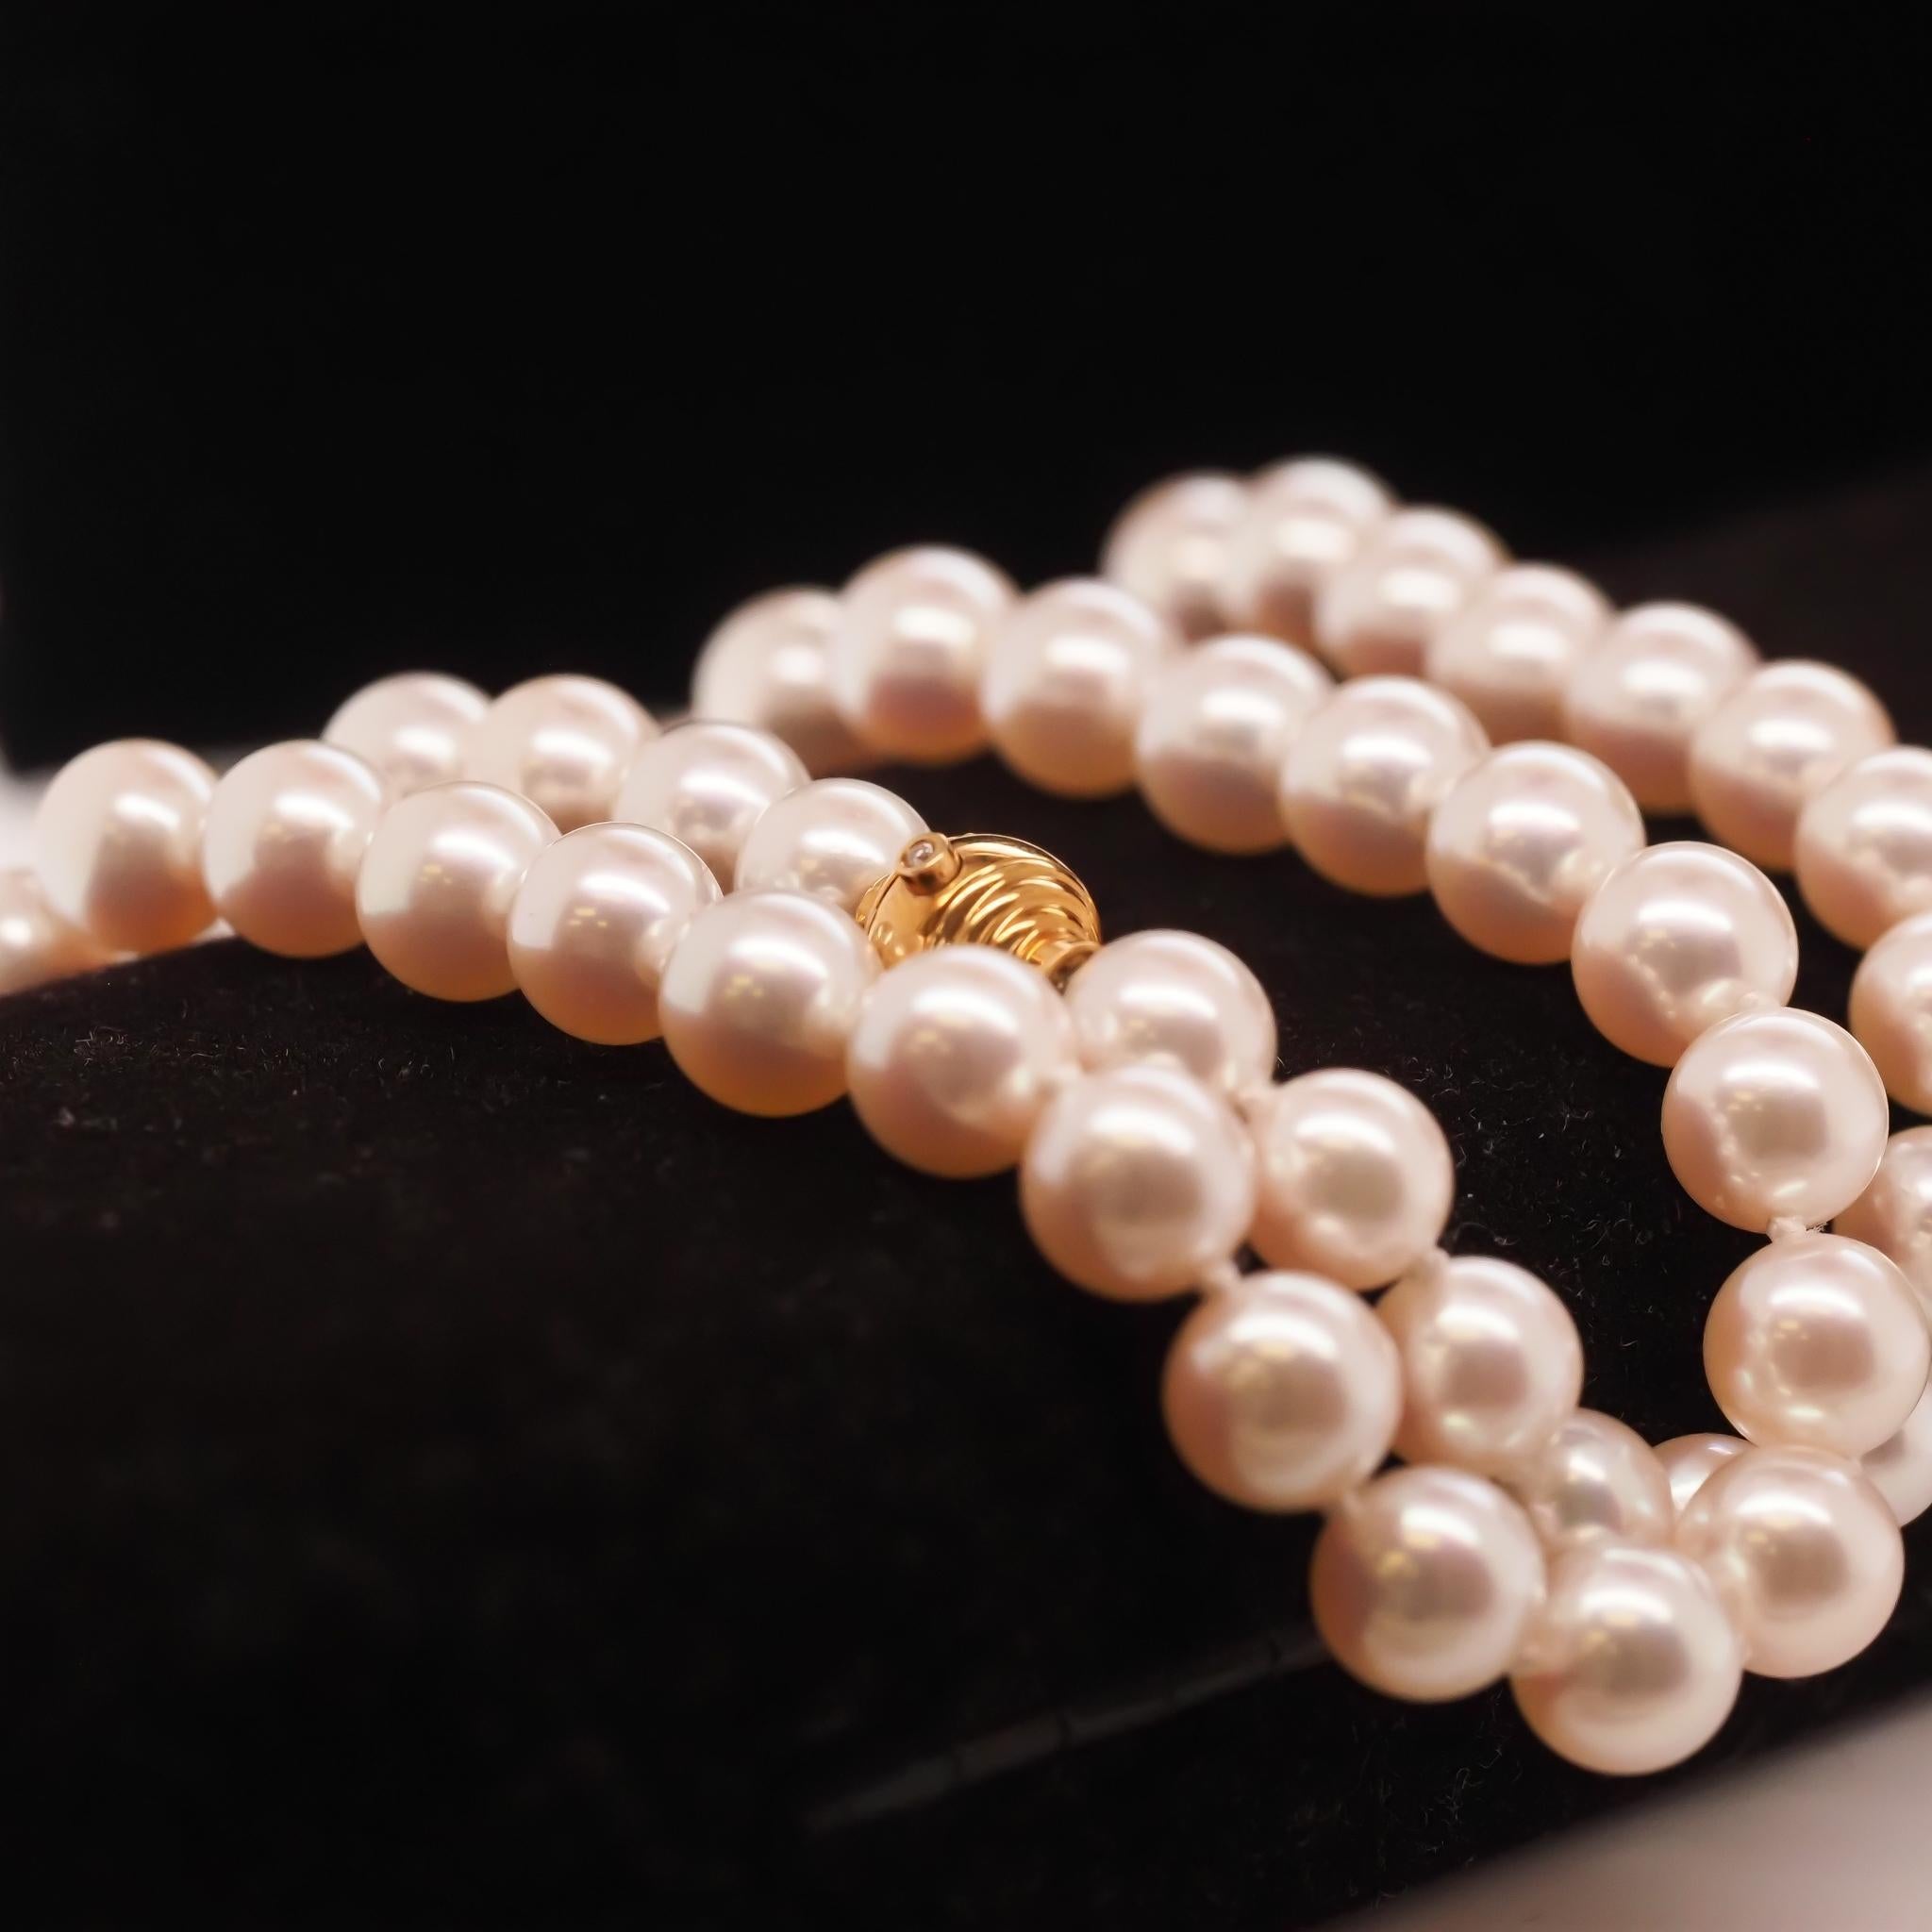 Item Details:
Metal Type: Clasp is 18K Yellow Gold [Hallmarked, and Tested]
Weight: 33.5 grams
Pearl Details
Measurement: 7.4mm, Pinkish Luster, AAA Quality
Diamond Details: .02ct, F Color, VS Clarity, Round Brilliant
Measurement: 18 Inches